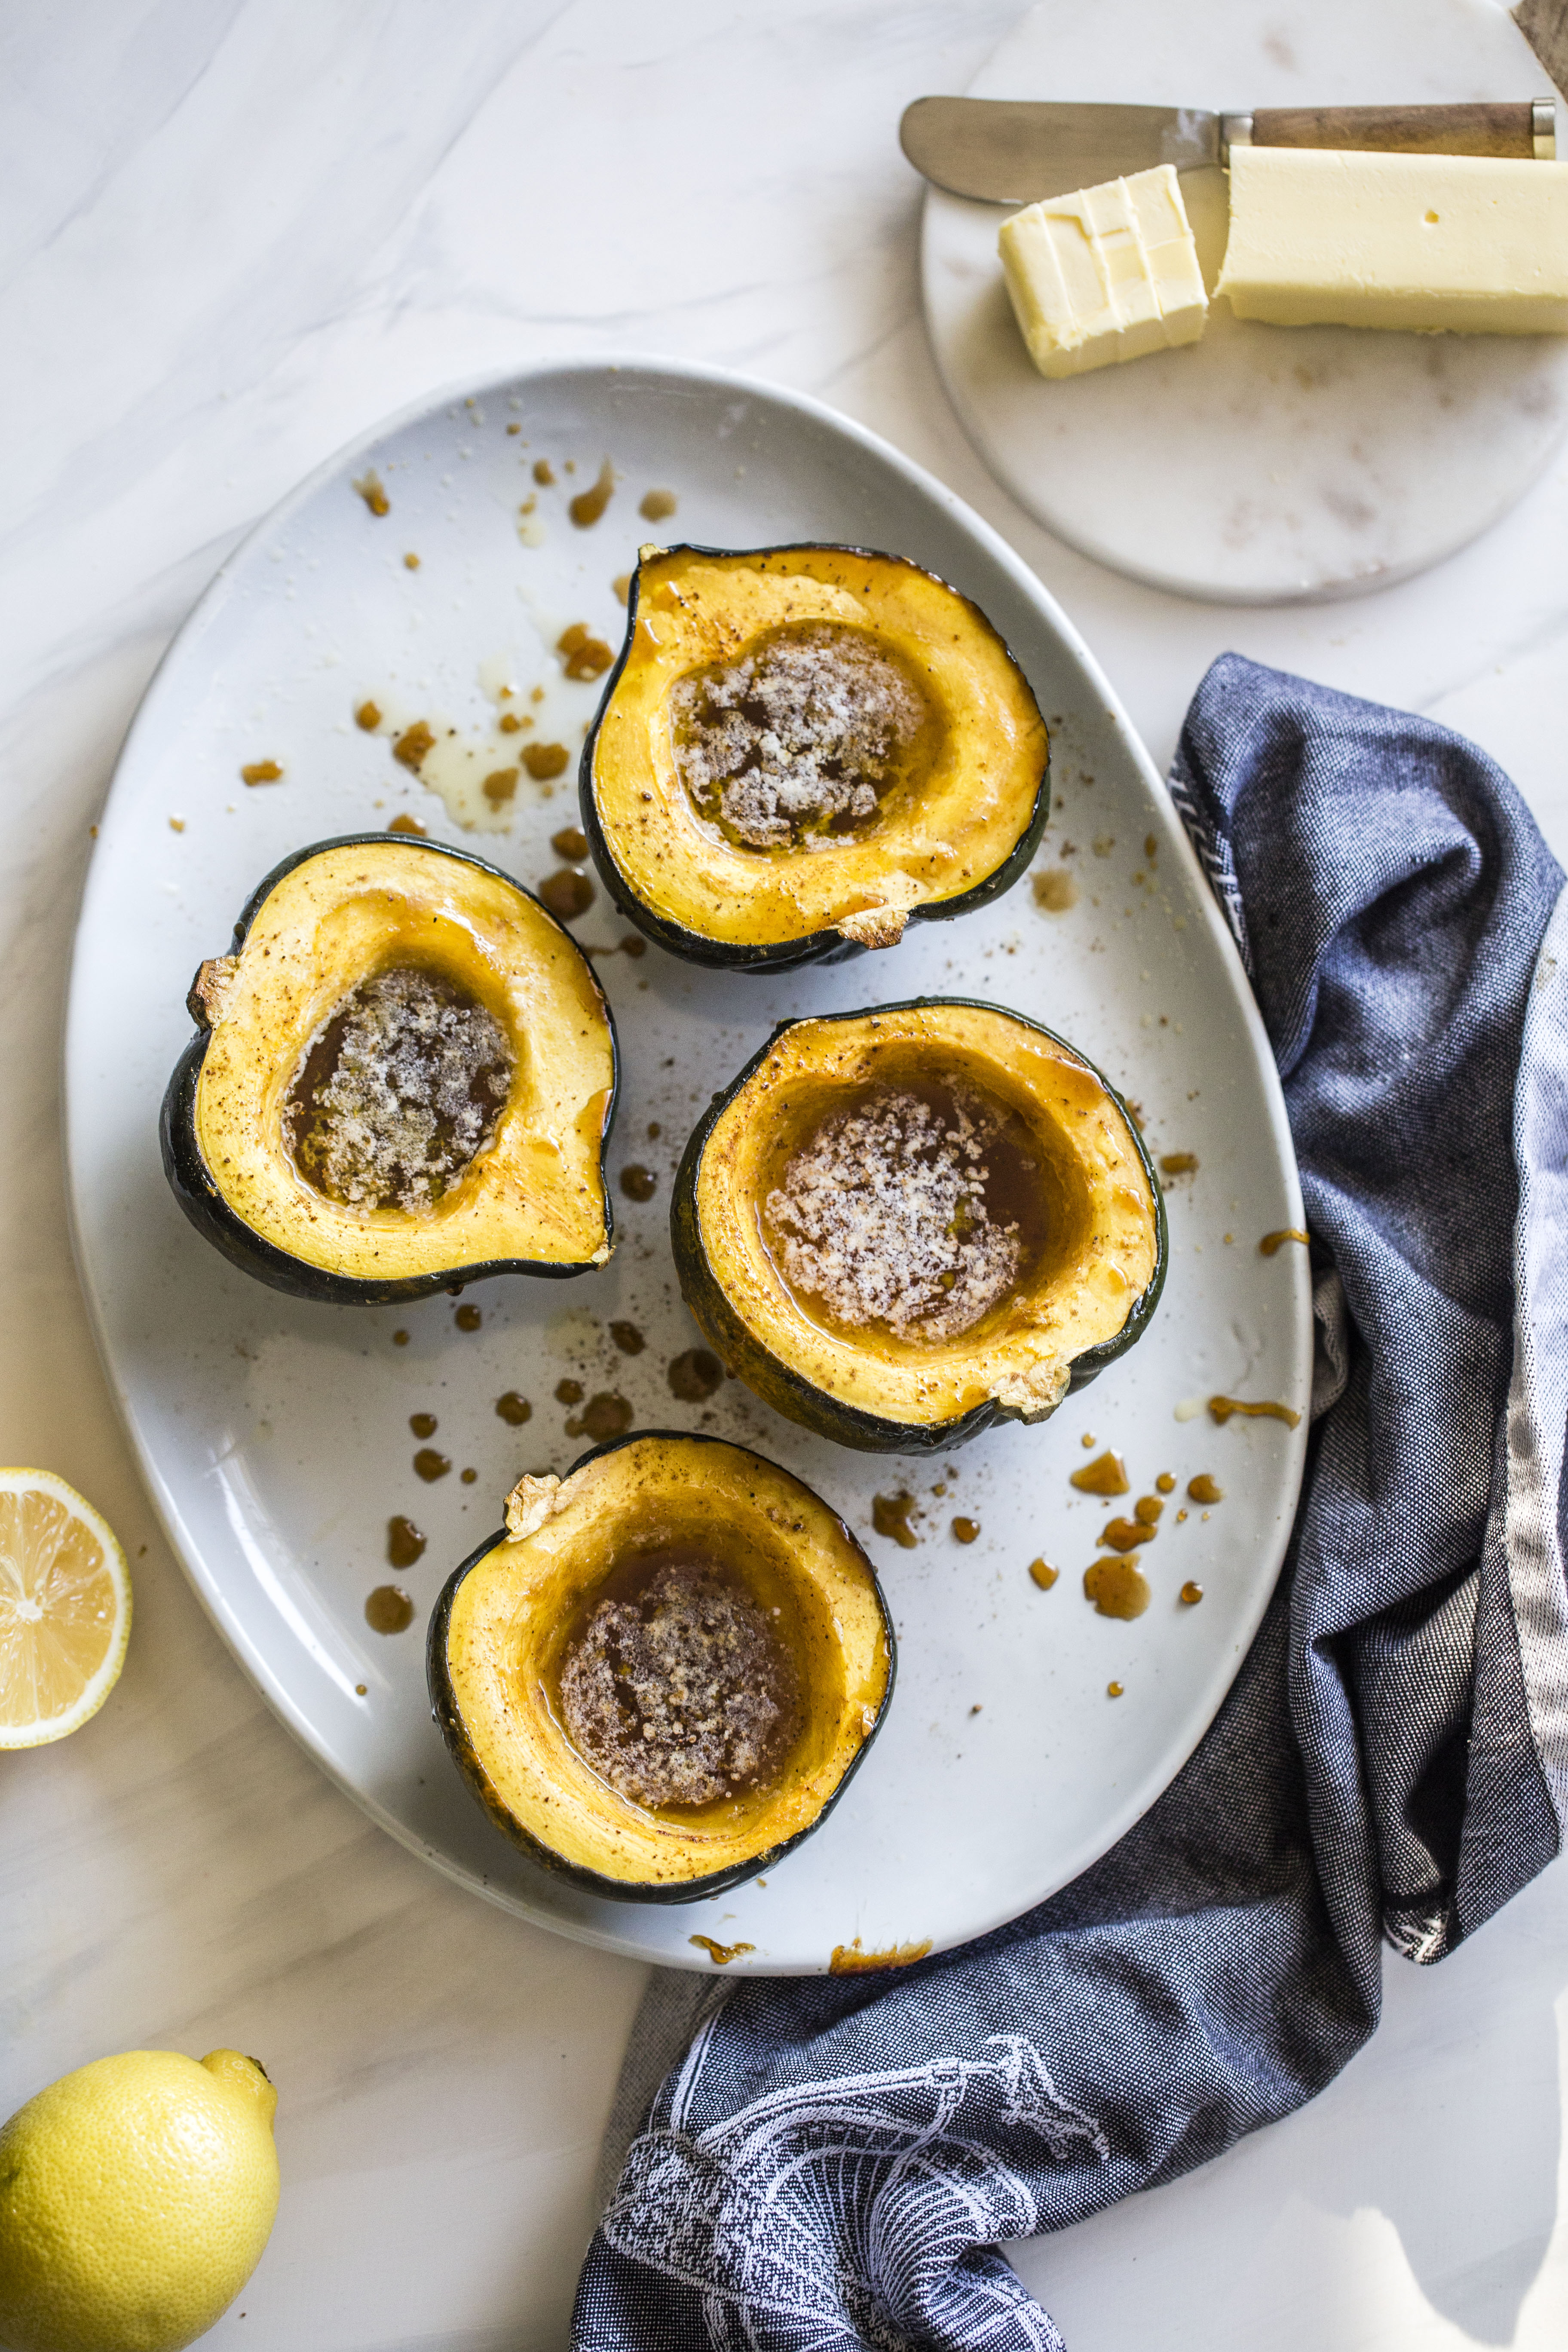 This baked acorn squash recipe is so delicious for the fall! It's made with vanilla and bourbon, finished with balsamic, is super easy, a bit indulgent and perfect for the season. Makes for a fabulous side dish in autumn or even a dessert! I howsweeteats.com #acorn #squash #baked #vanilla #bourbon